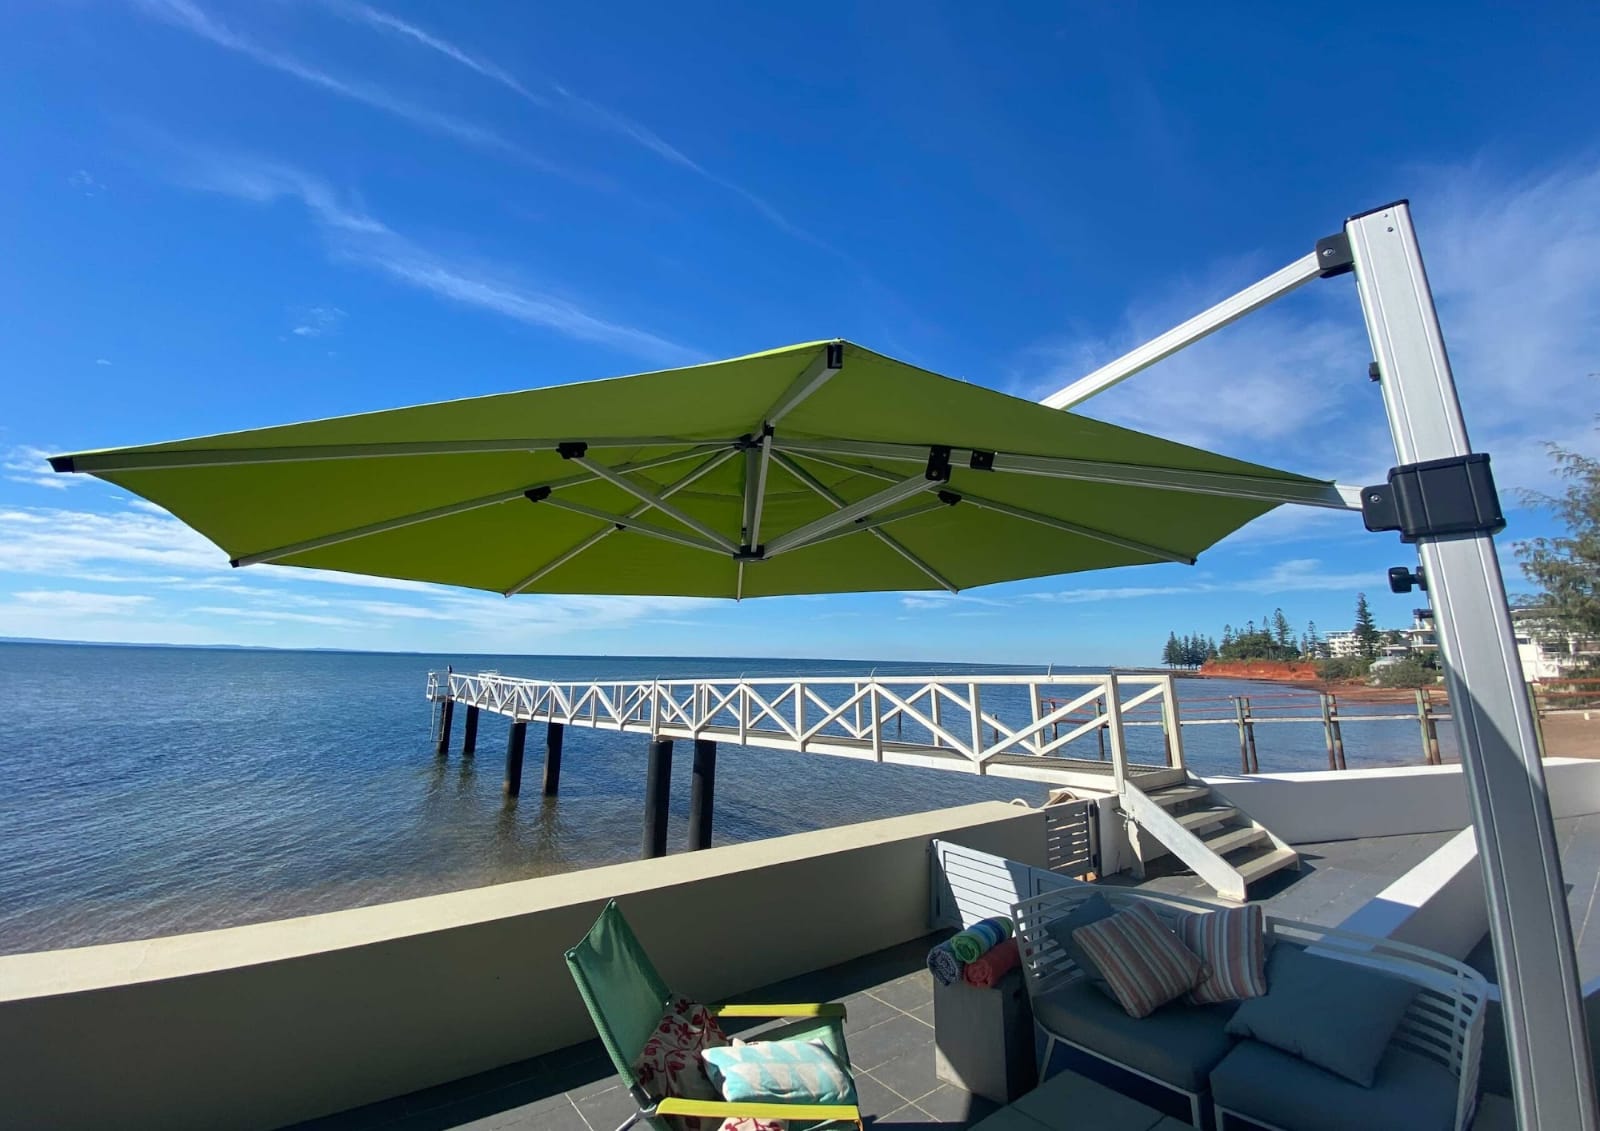 Why are Cantilever Umbrellas Beneficial for Businesses